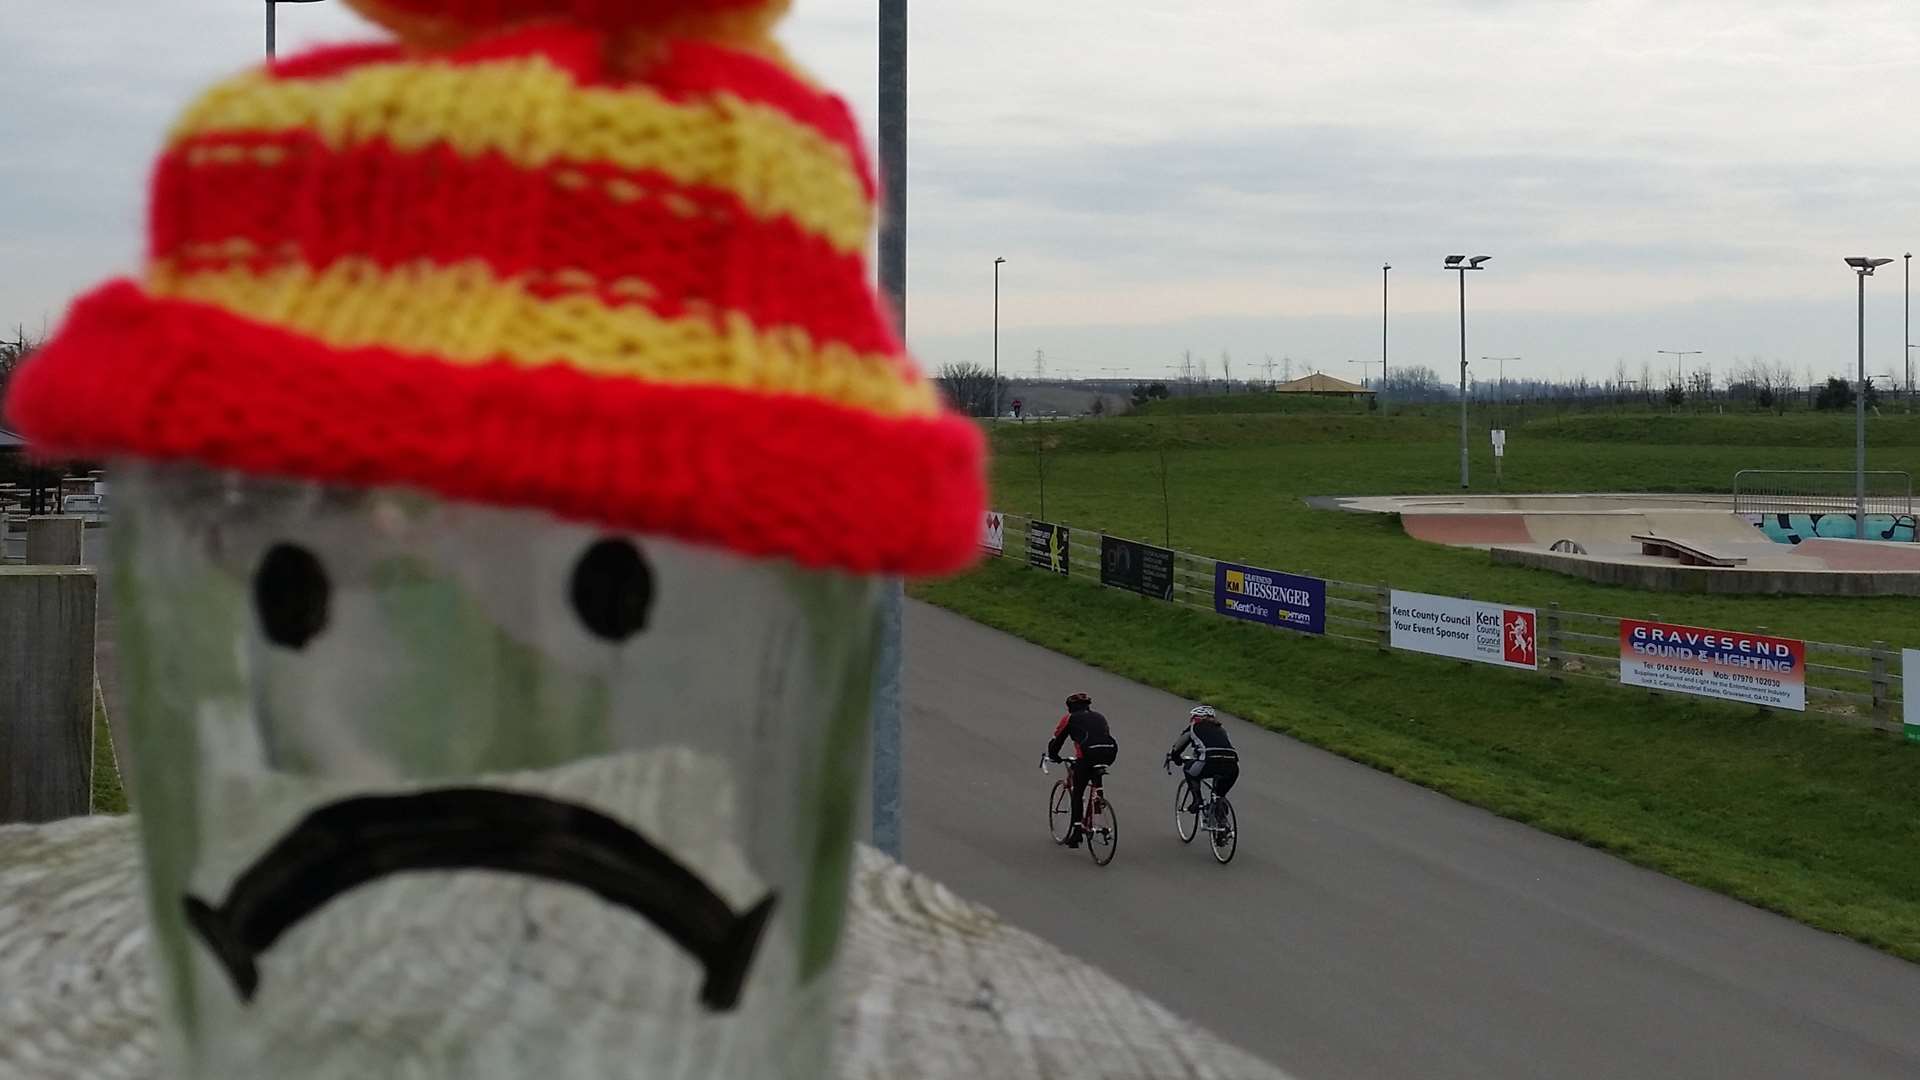 Your jam jars are needed to help Cyclopark's big event